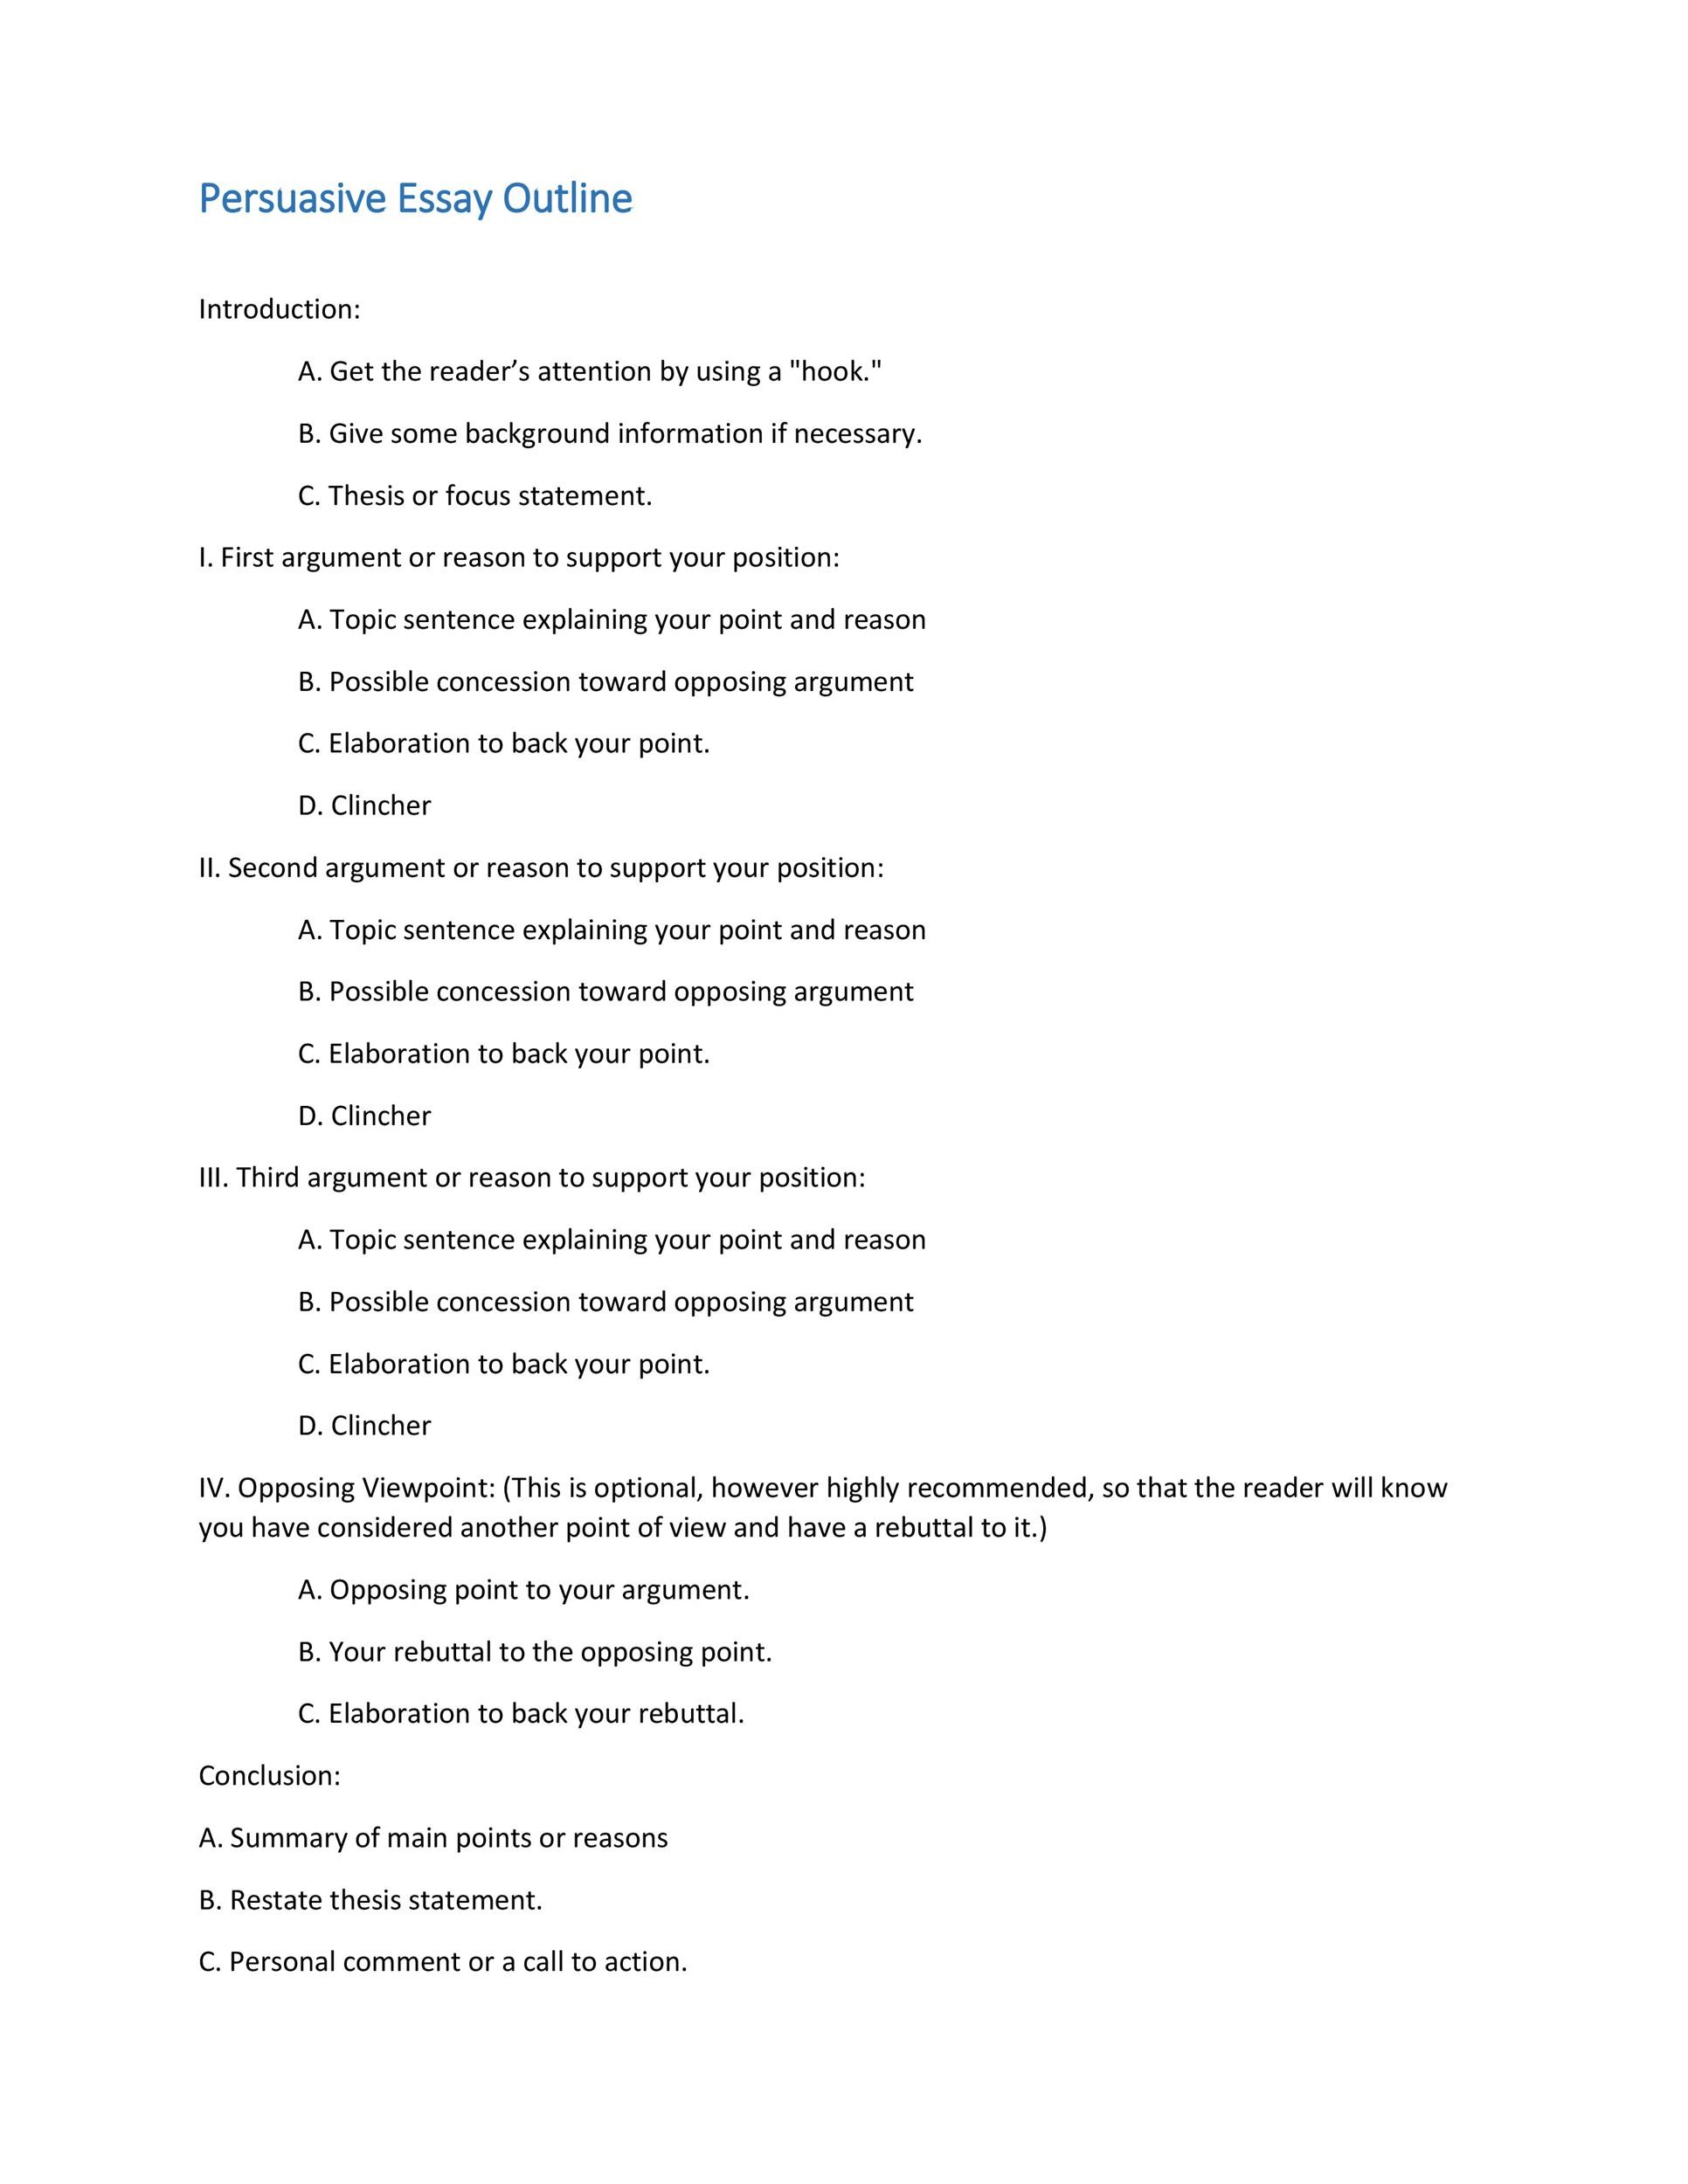 essay writing outline template